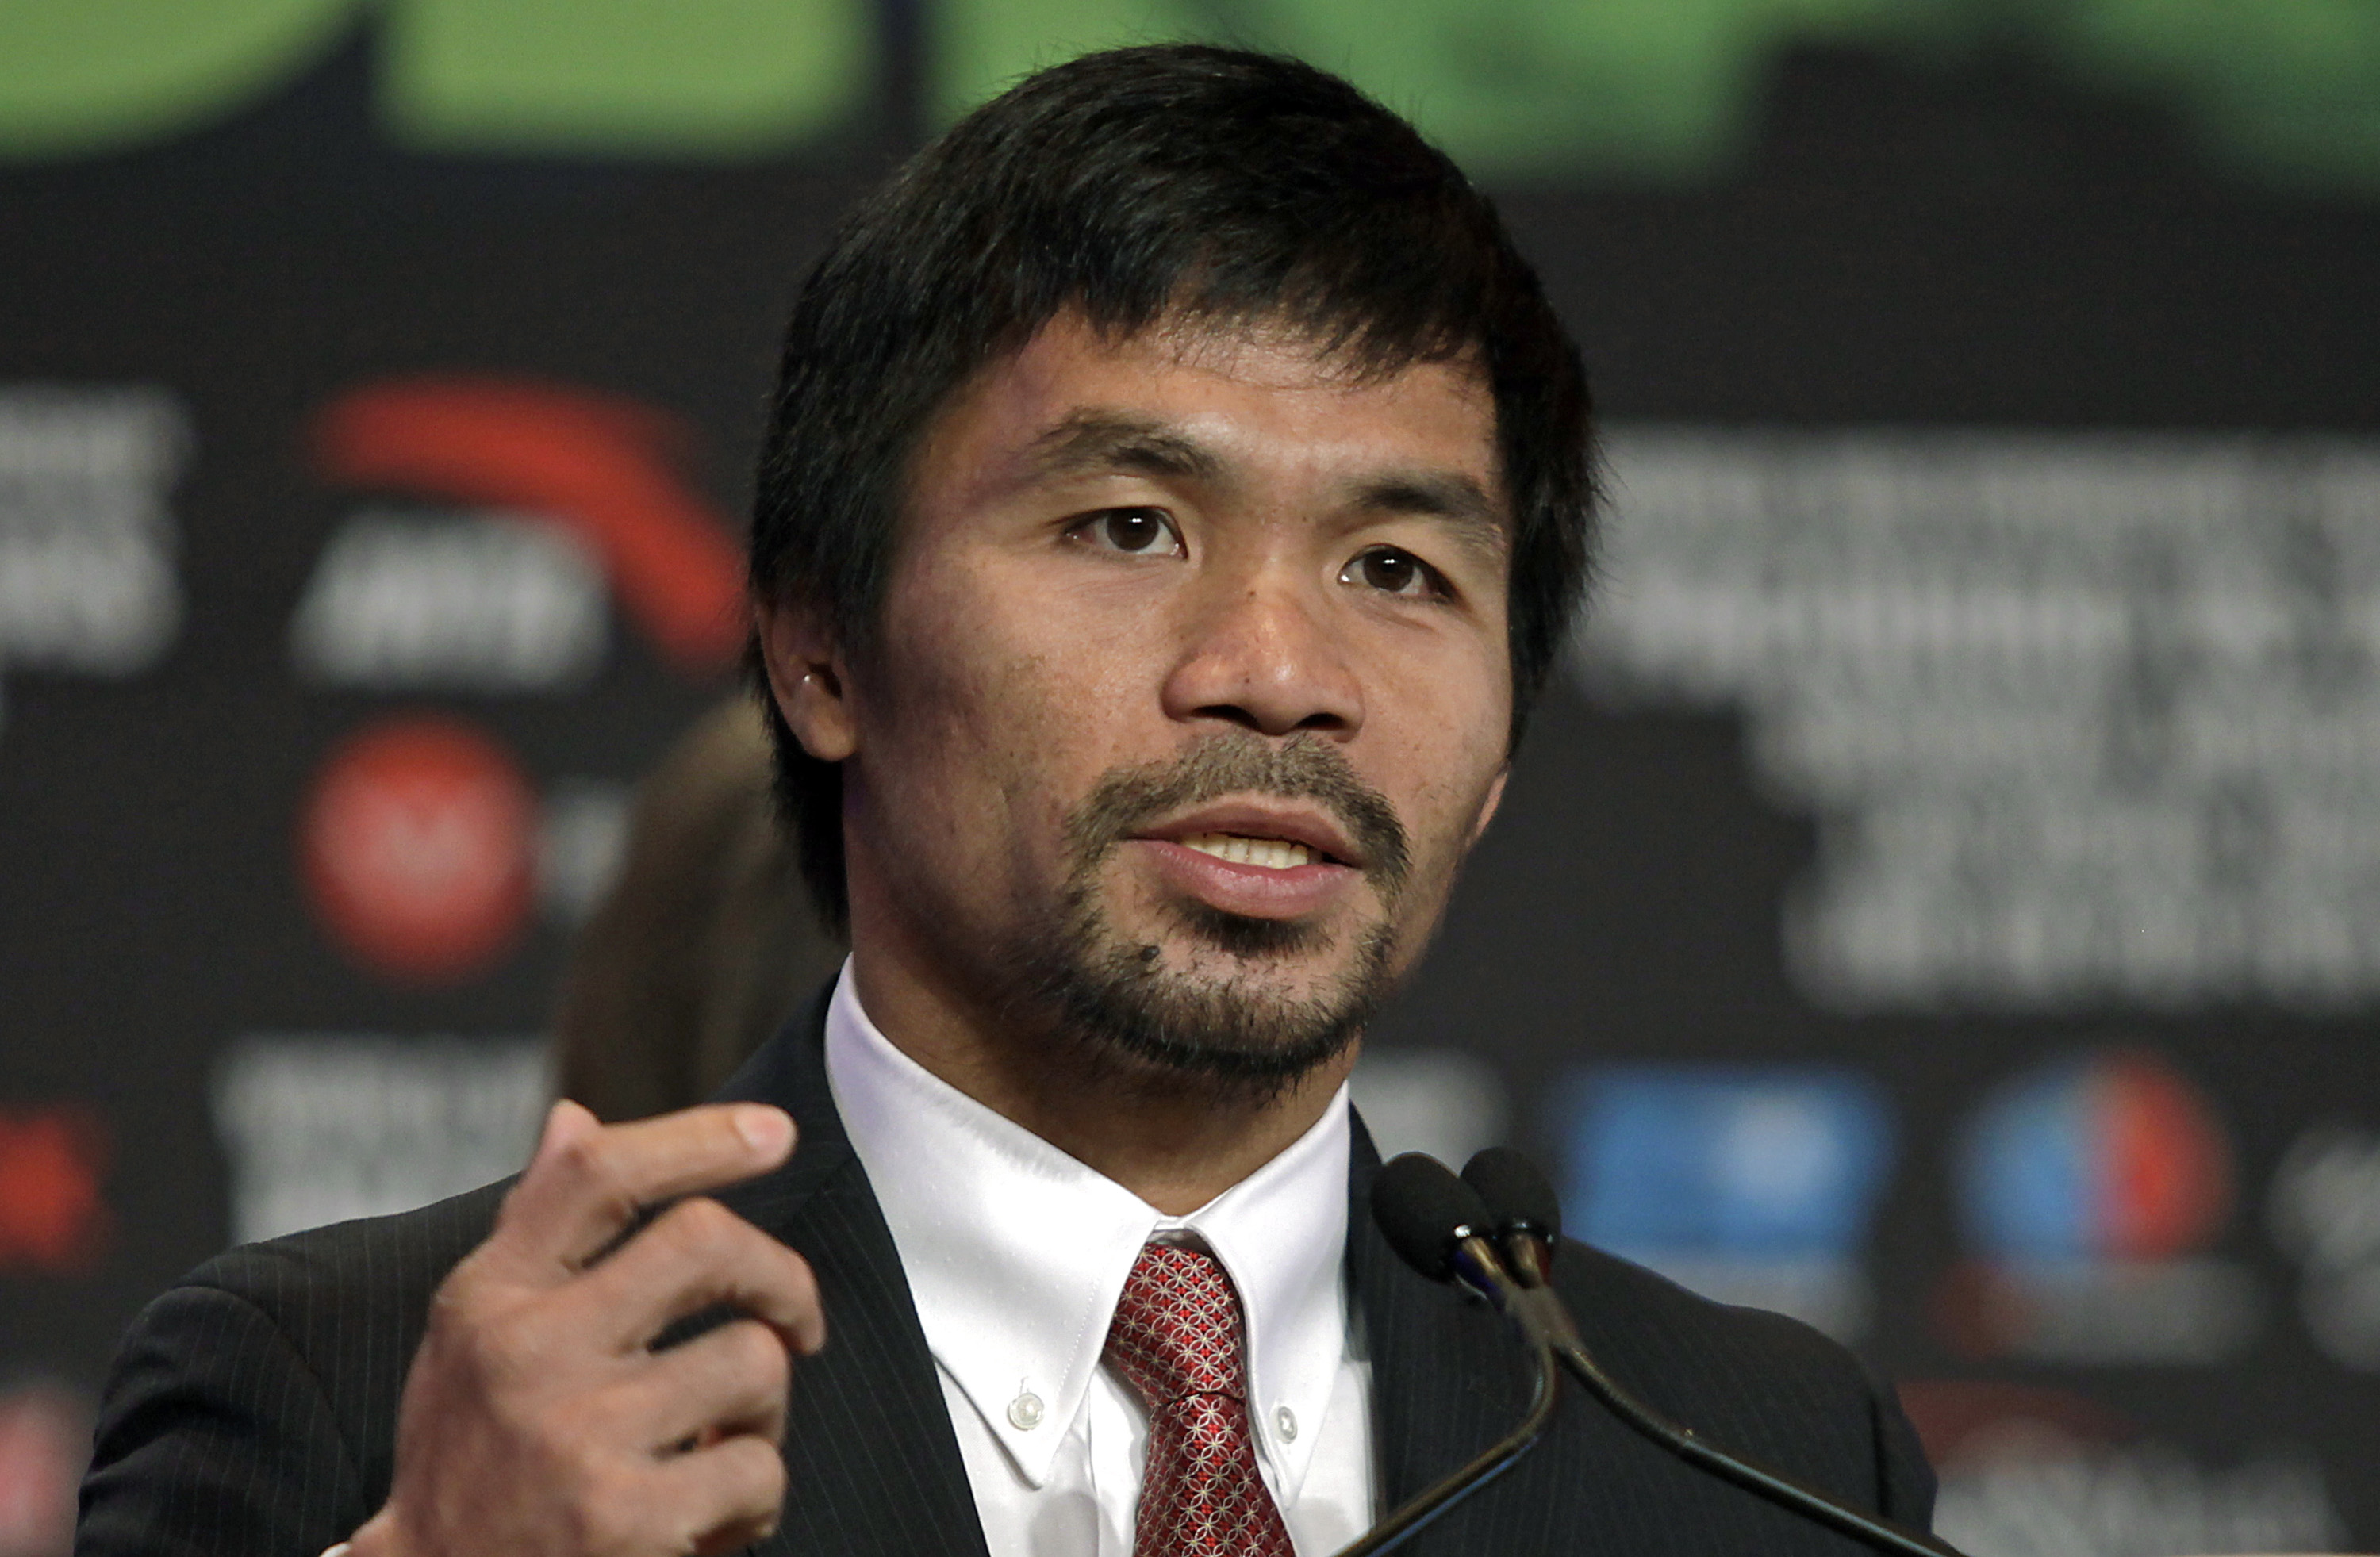 Boxer Manny Pacquiao of the Philippines speaks during a news conference at The Wynn Las Vegas on November 2, 2016. Pacquiao will challenge Jessie Vargas of the US for the WBO Welterweight Championship on November 5 at the Thomas & Mack Center in Las Vegas. / AFP PHOTO / John GURZINSKI